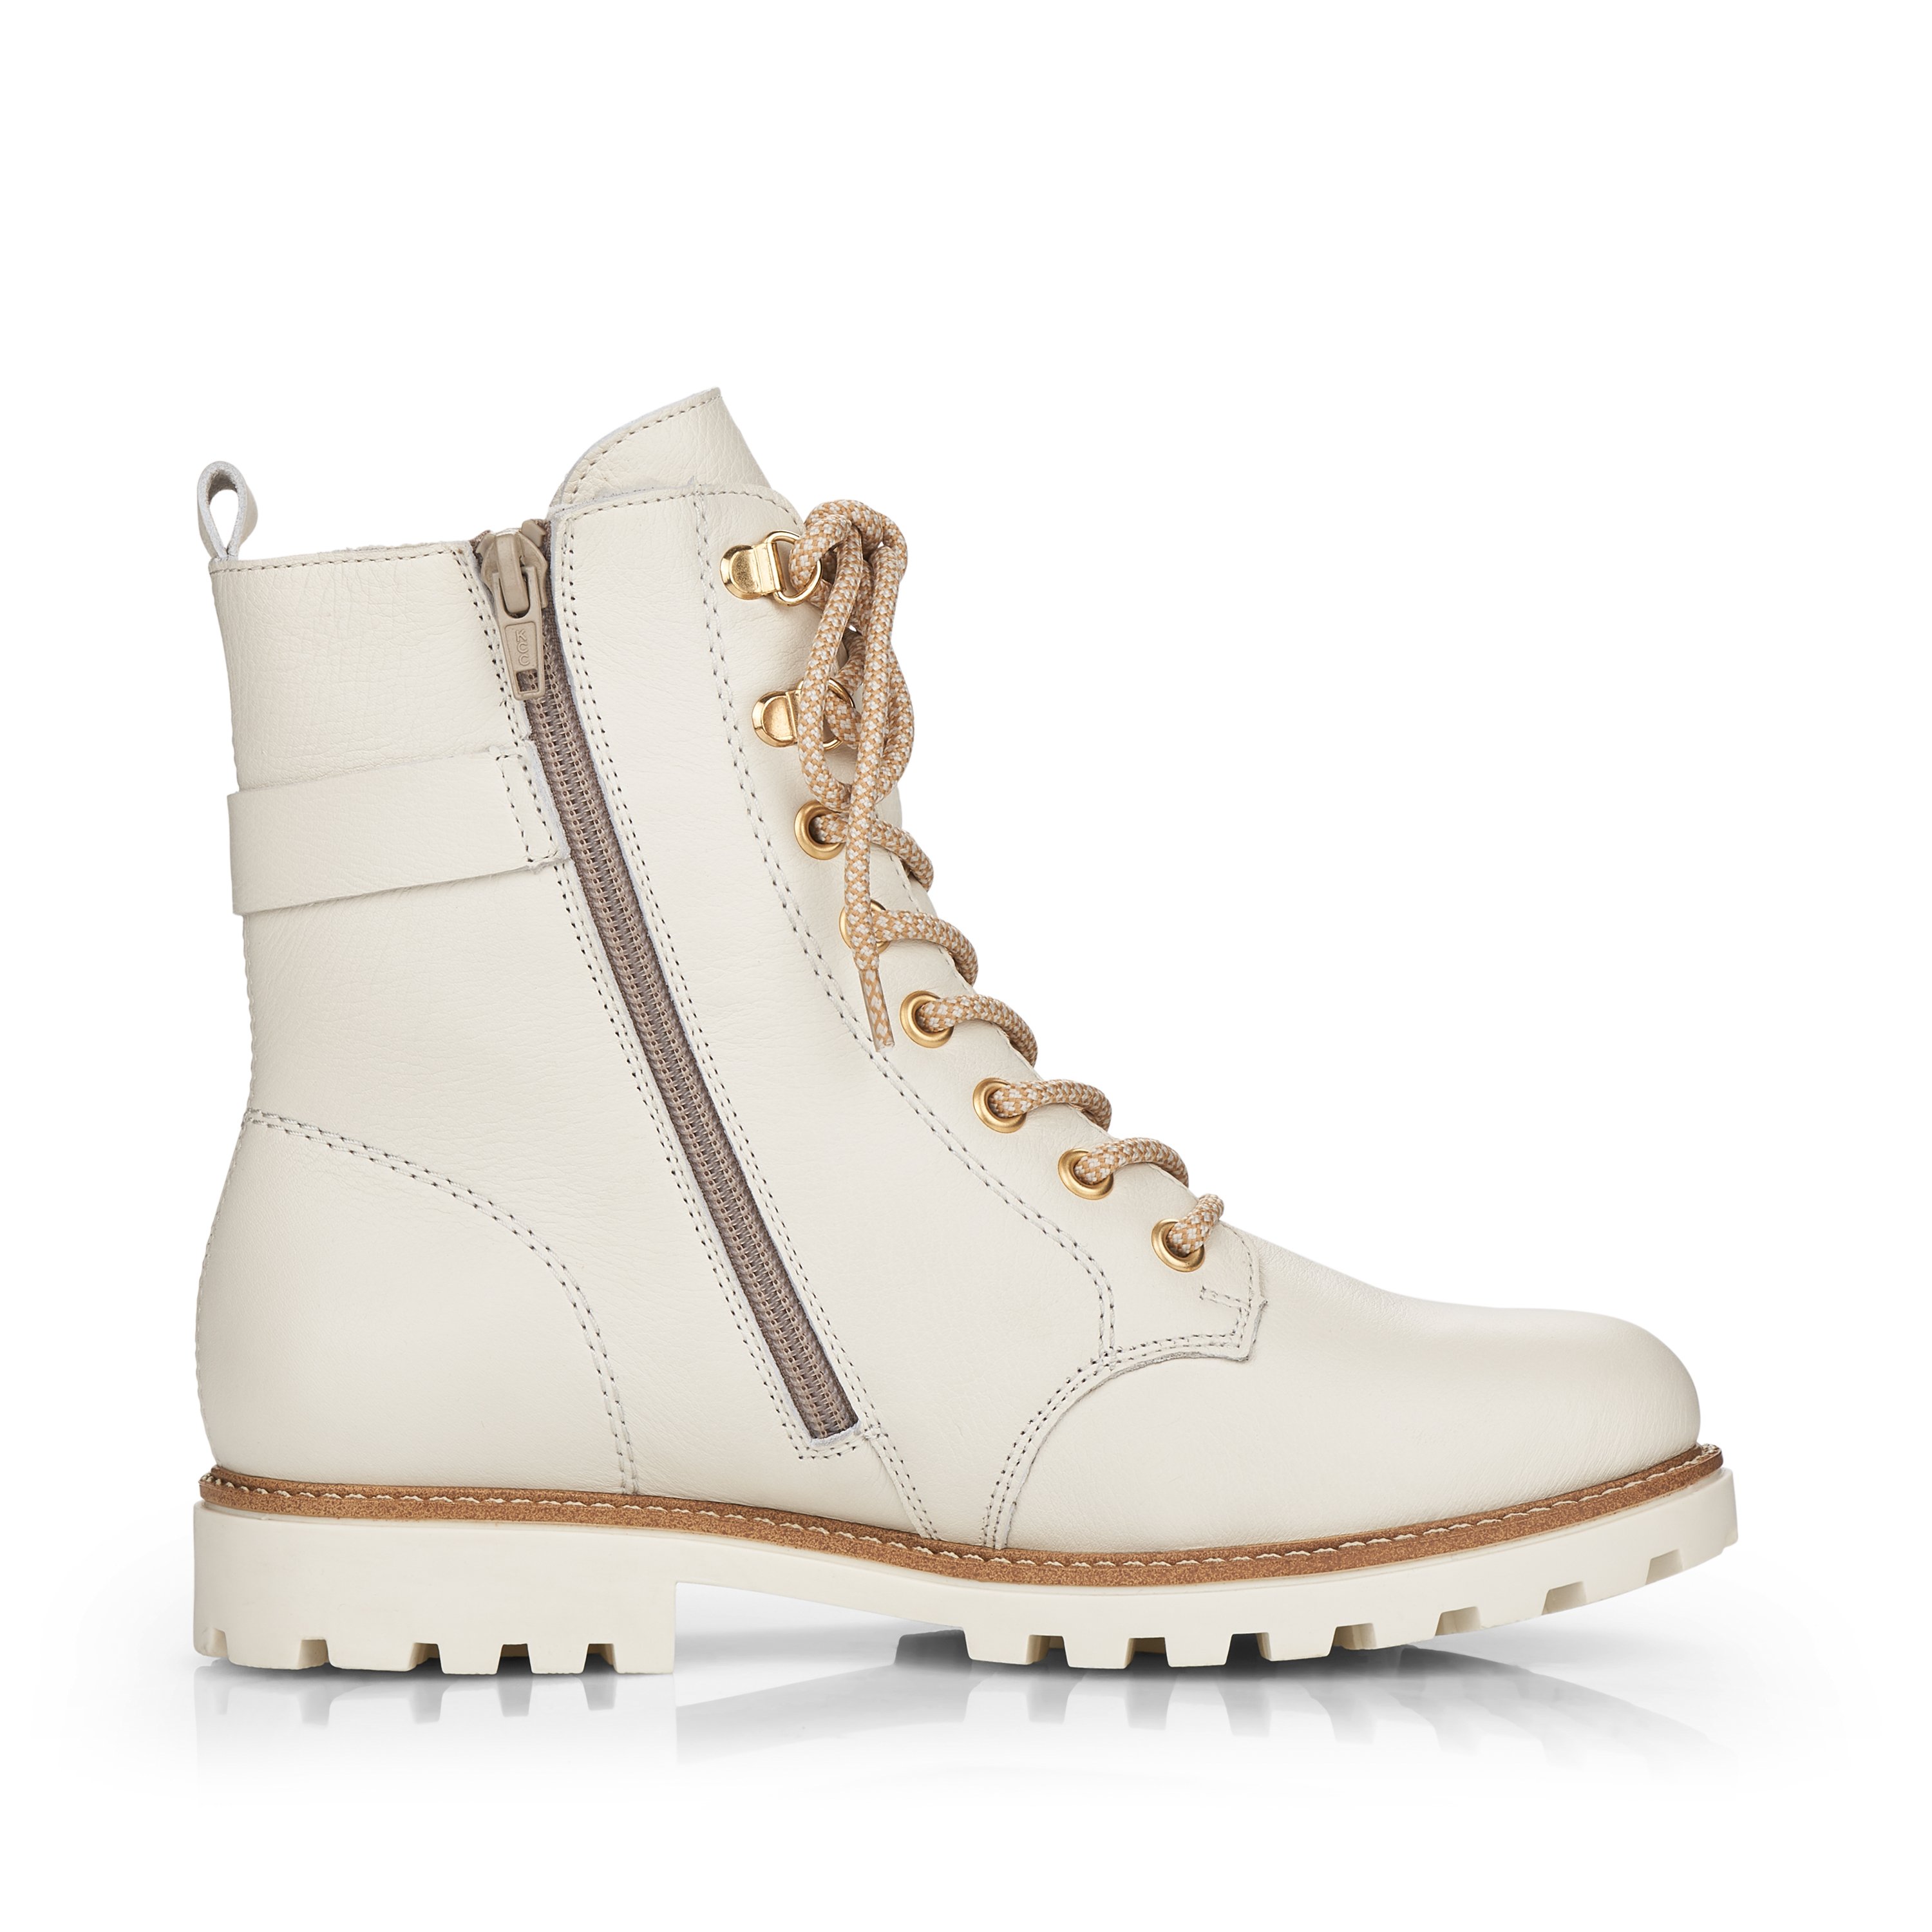 Off-white remonte women´s lace-up boots D8475-80 with flexible profile sole. Shoe inside